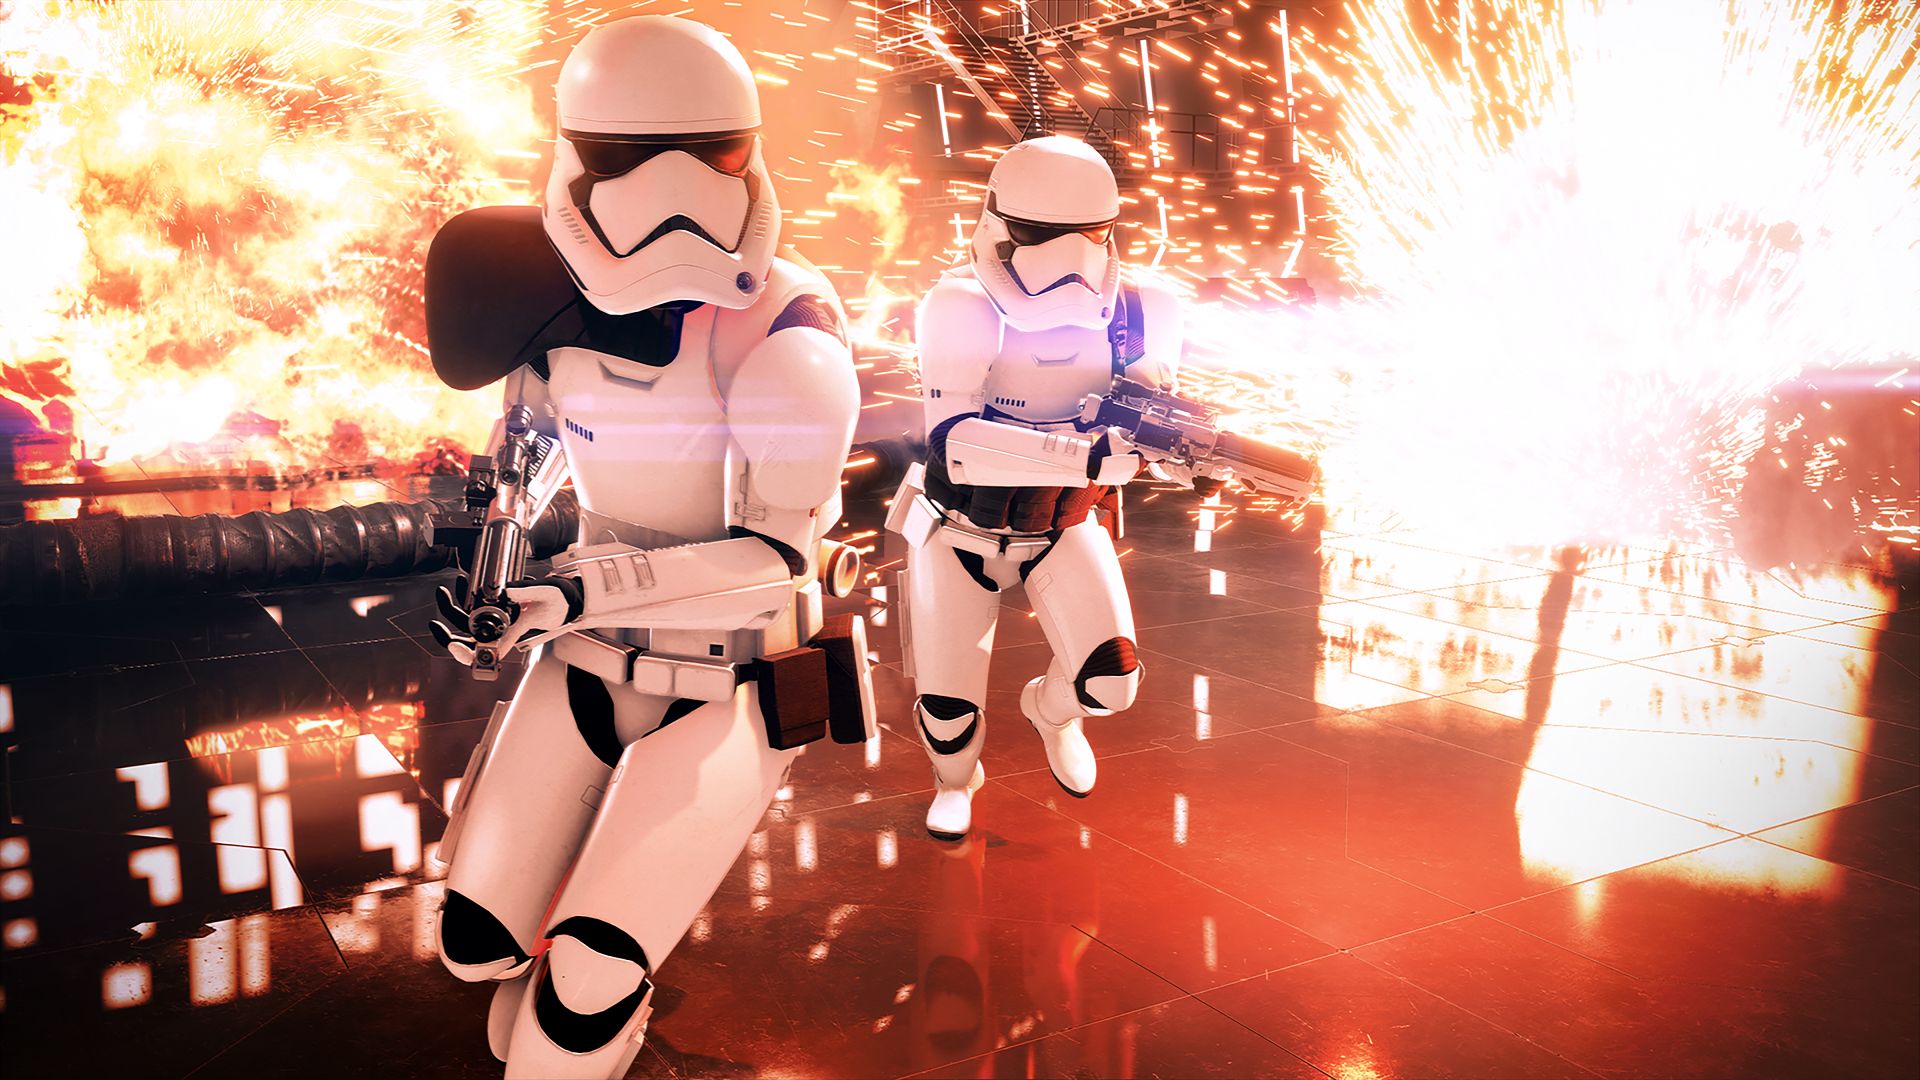 Image for Star Wars Battlefront 2 PC: 1440p Ultra Settings Showcase